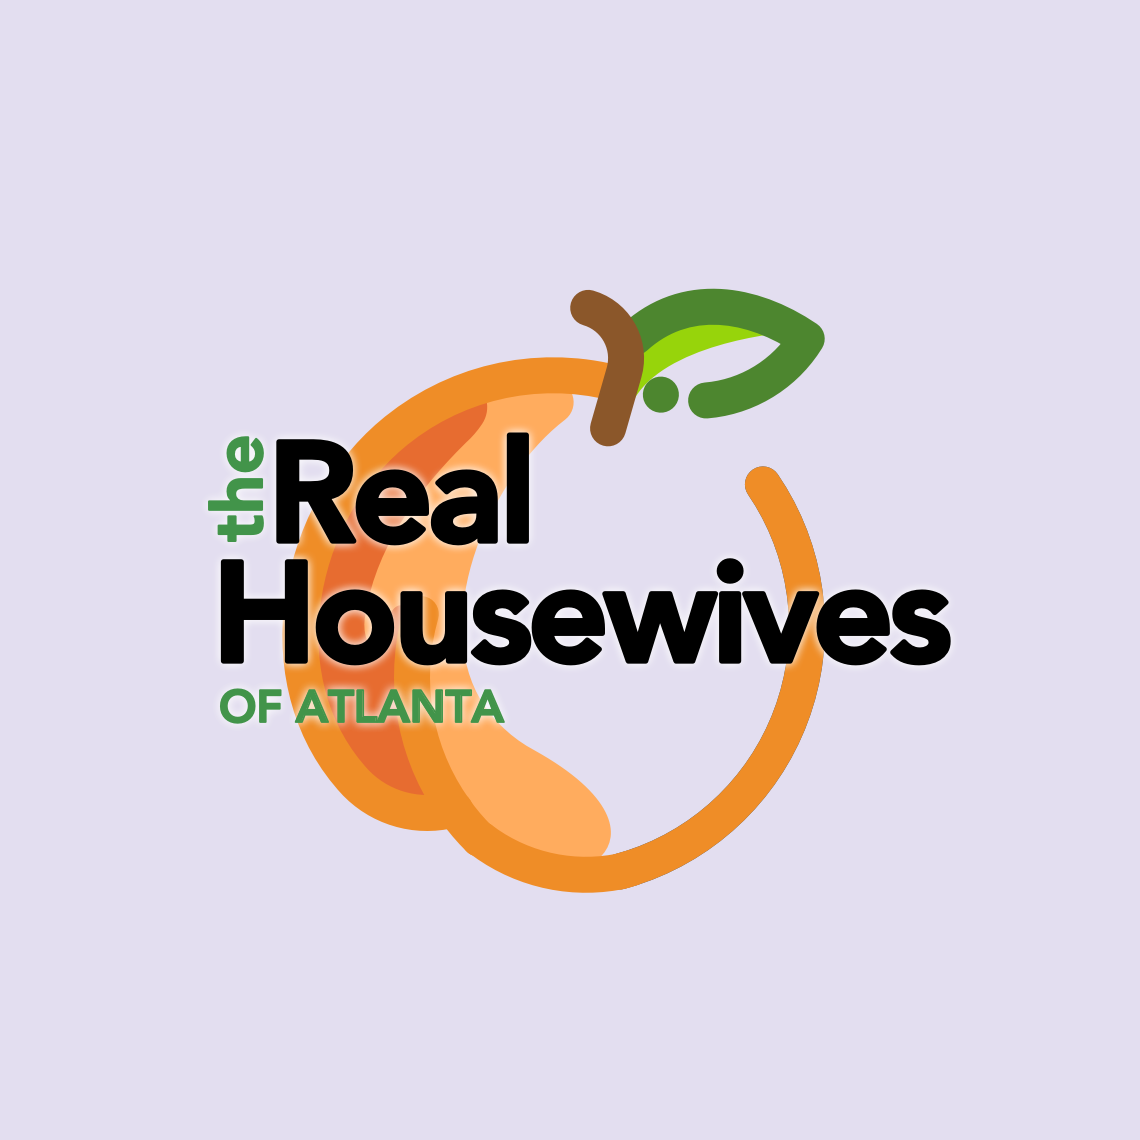 Real Housewives of Atlanta: 5 things you DIDN'T KNOW about Eva Marcille!